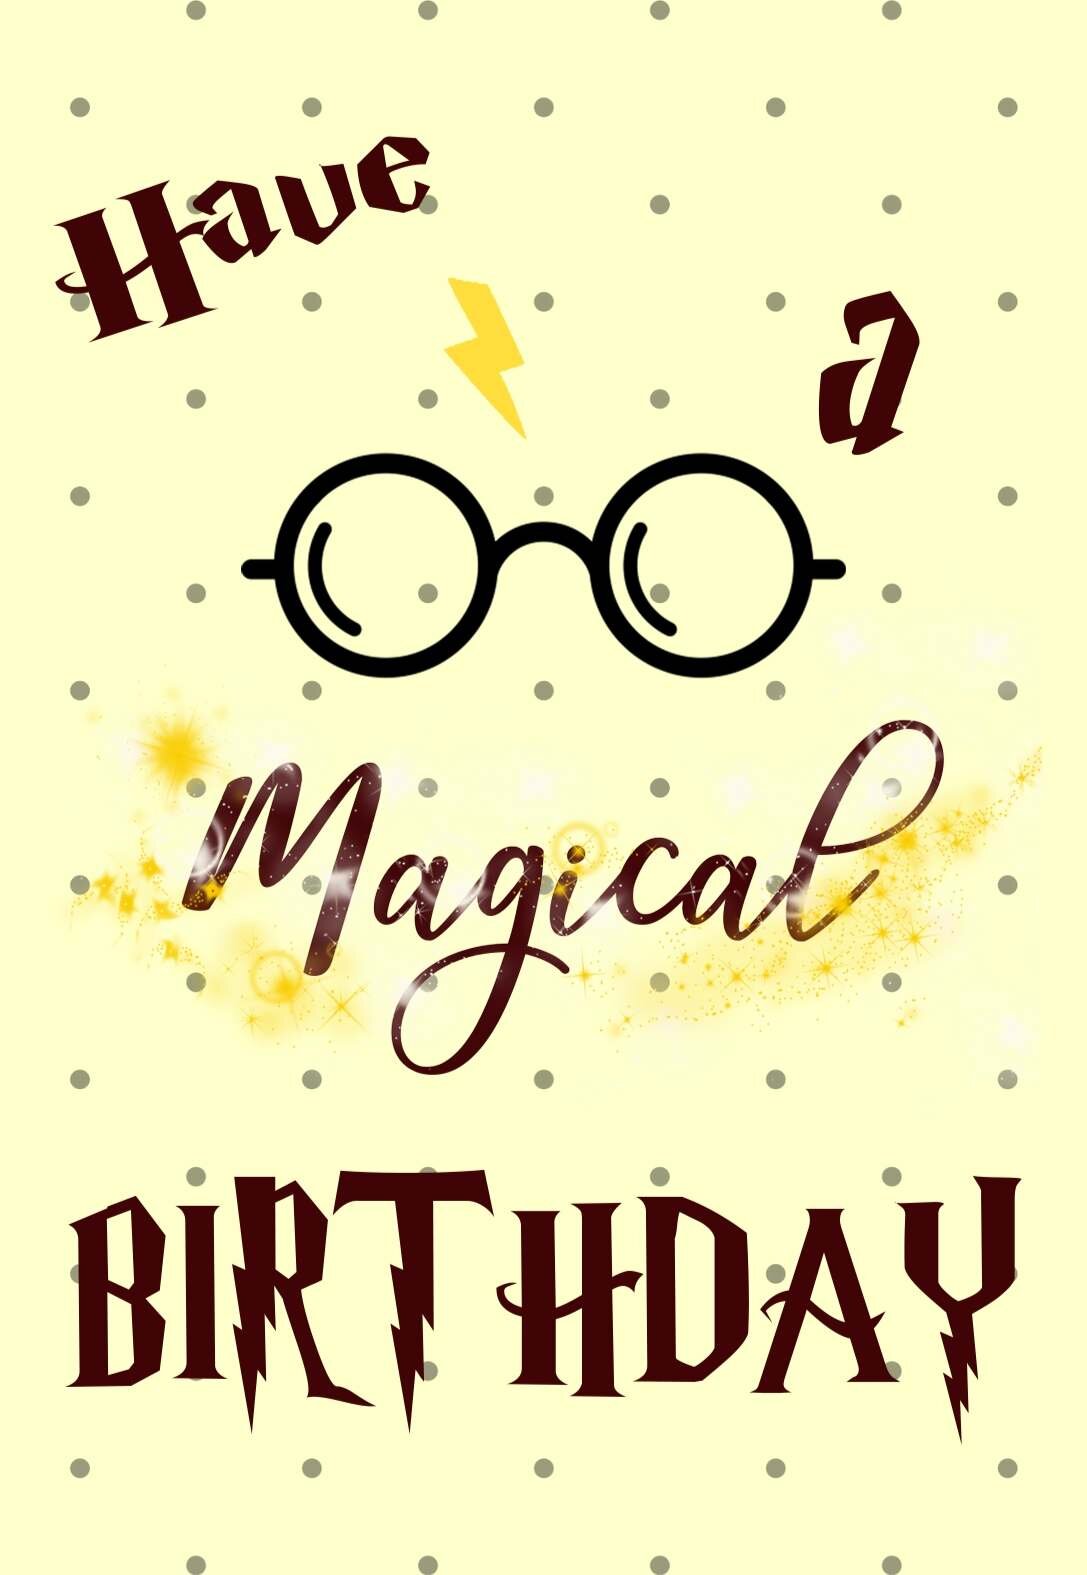 Harry Potter Birthday Card Printable Cards Info